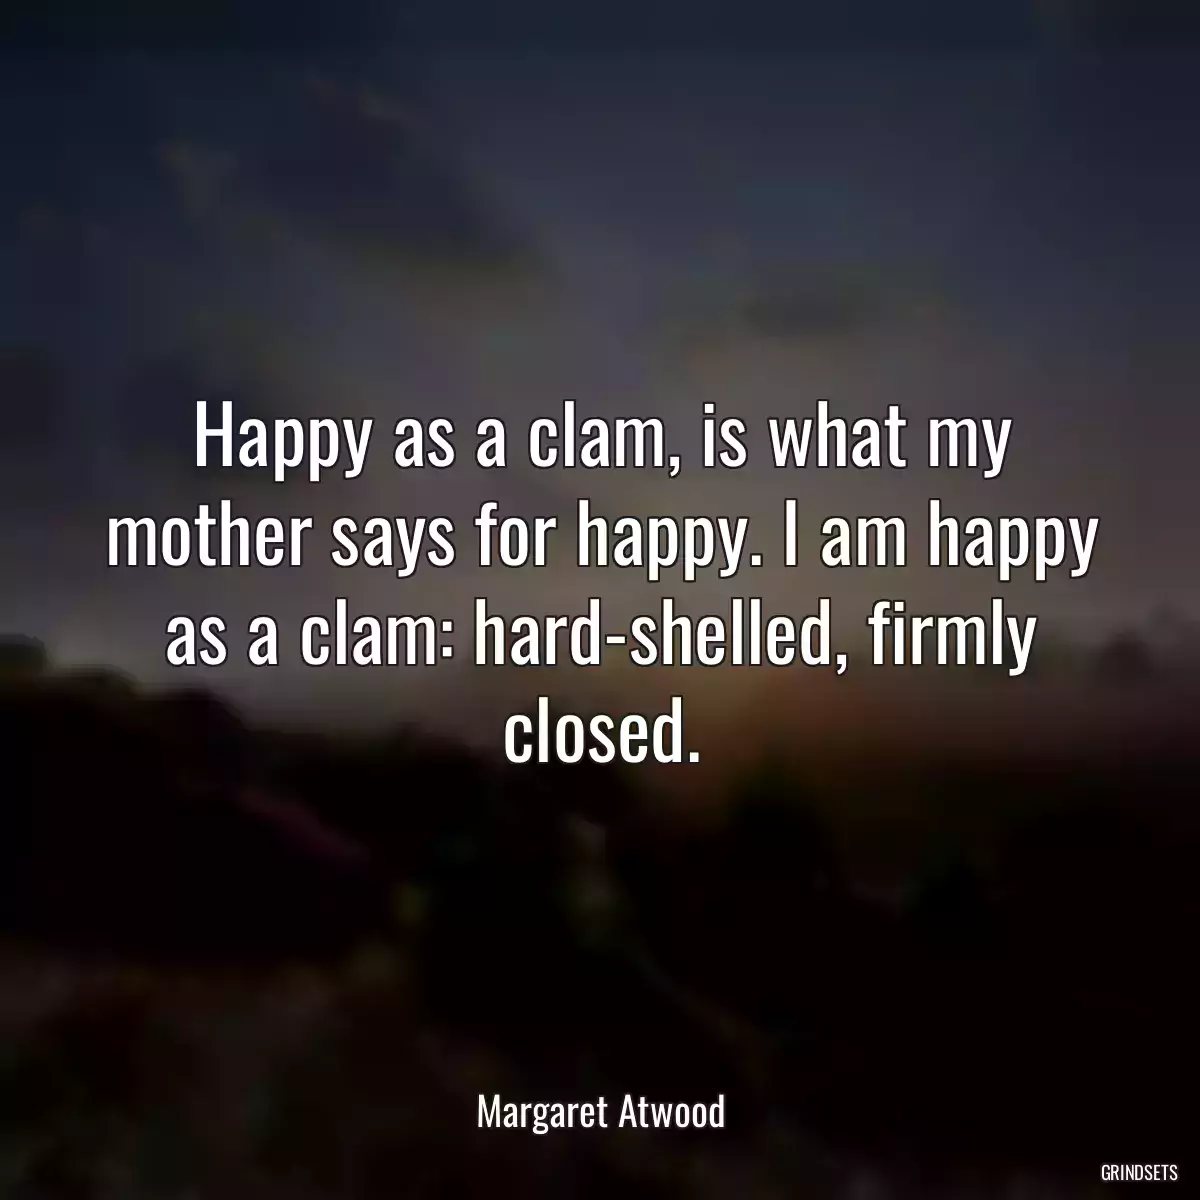 Happy as a clam, is what my mother says for happy. I am happy as a clam: hard-shelled, firmly closed.